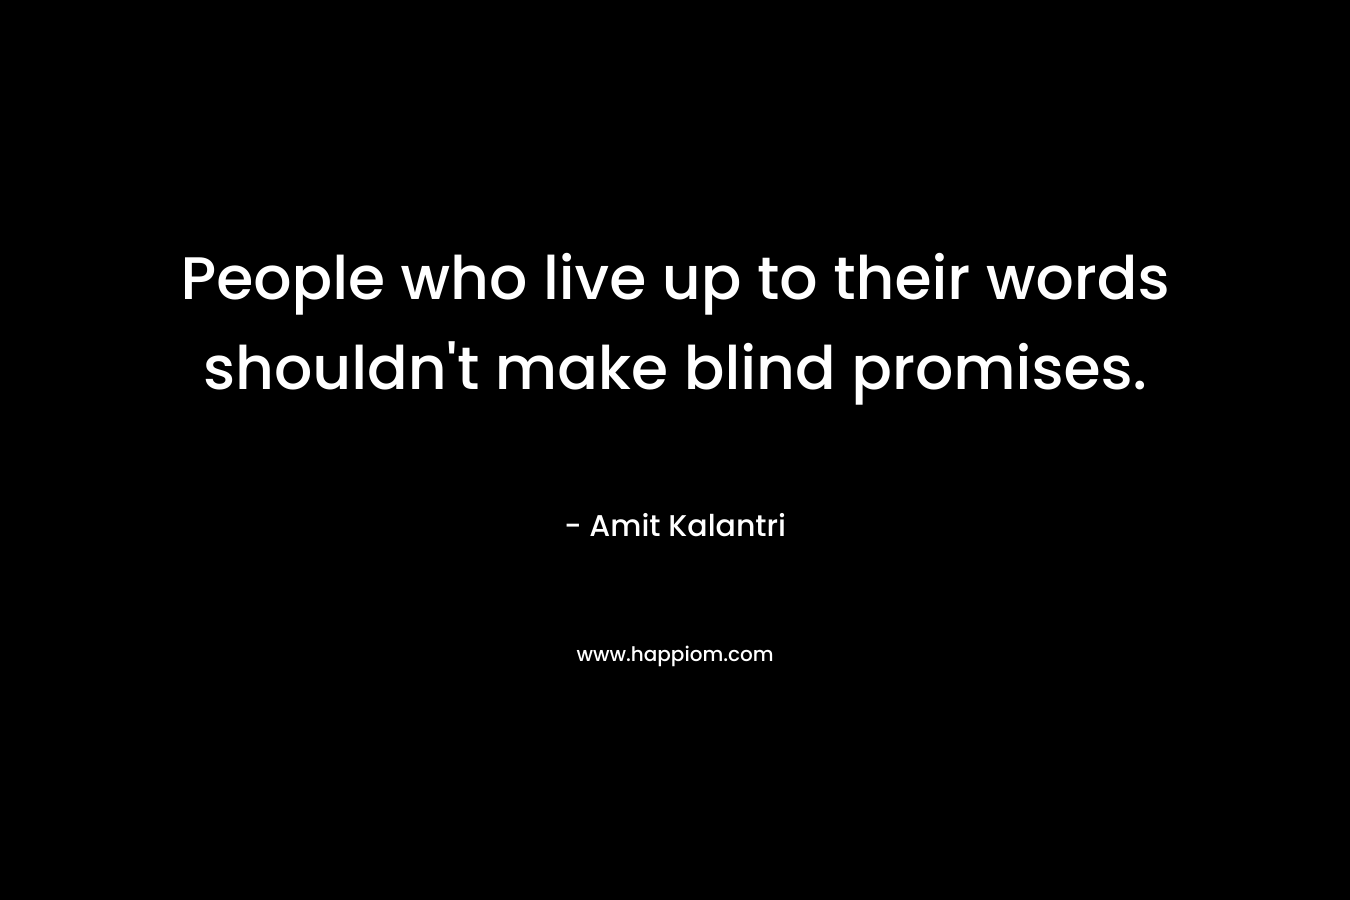 People who live up to their words shouldn't make blind promises.